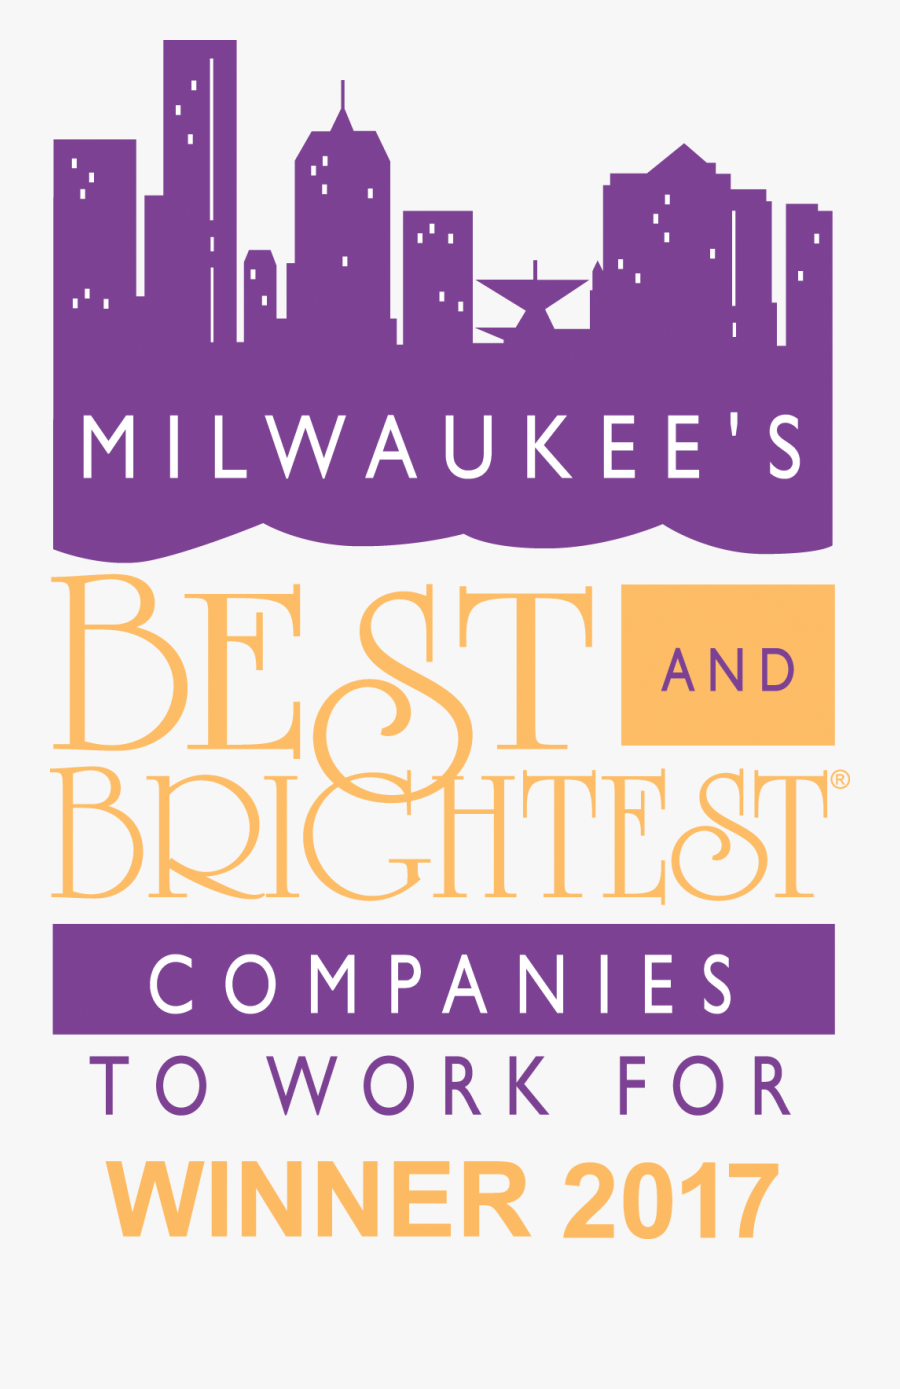 Milwaukee"s Best & Brightest Companies To Work For - Skyline, Transparent Clipart